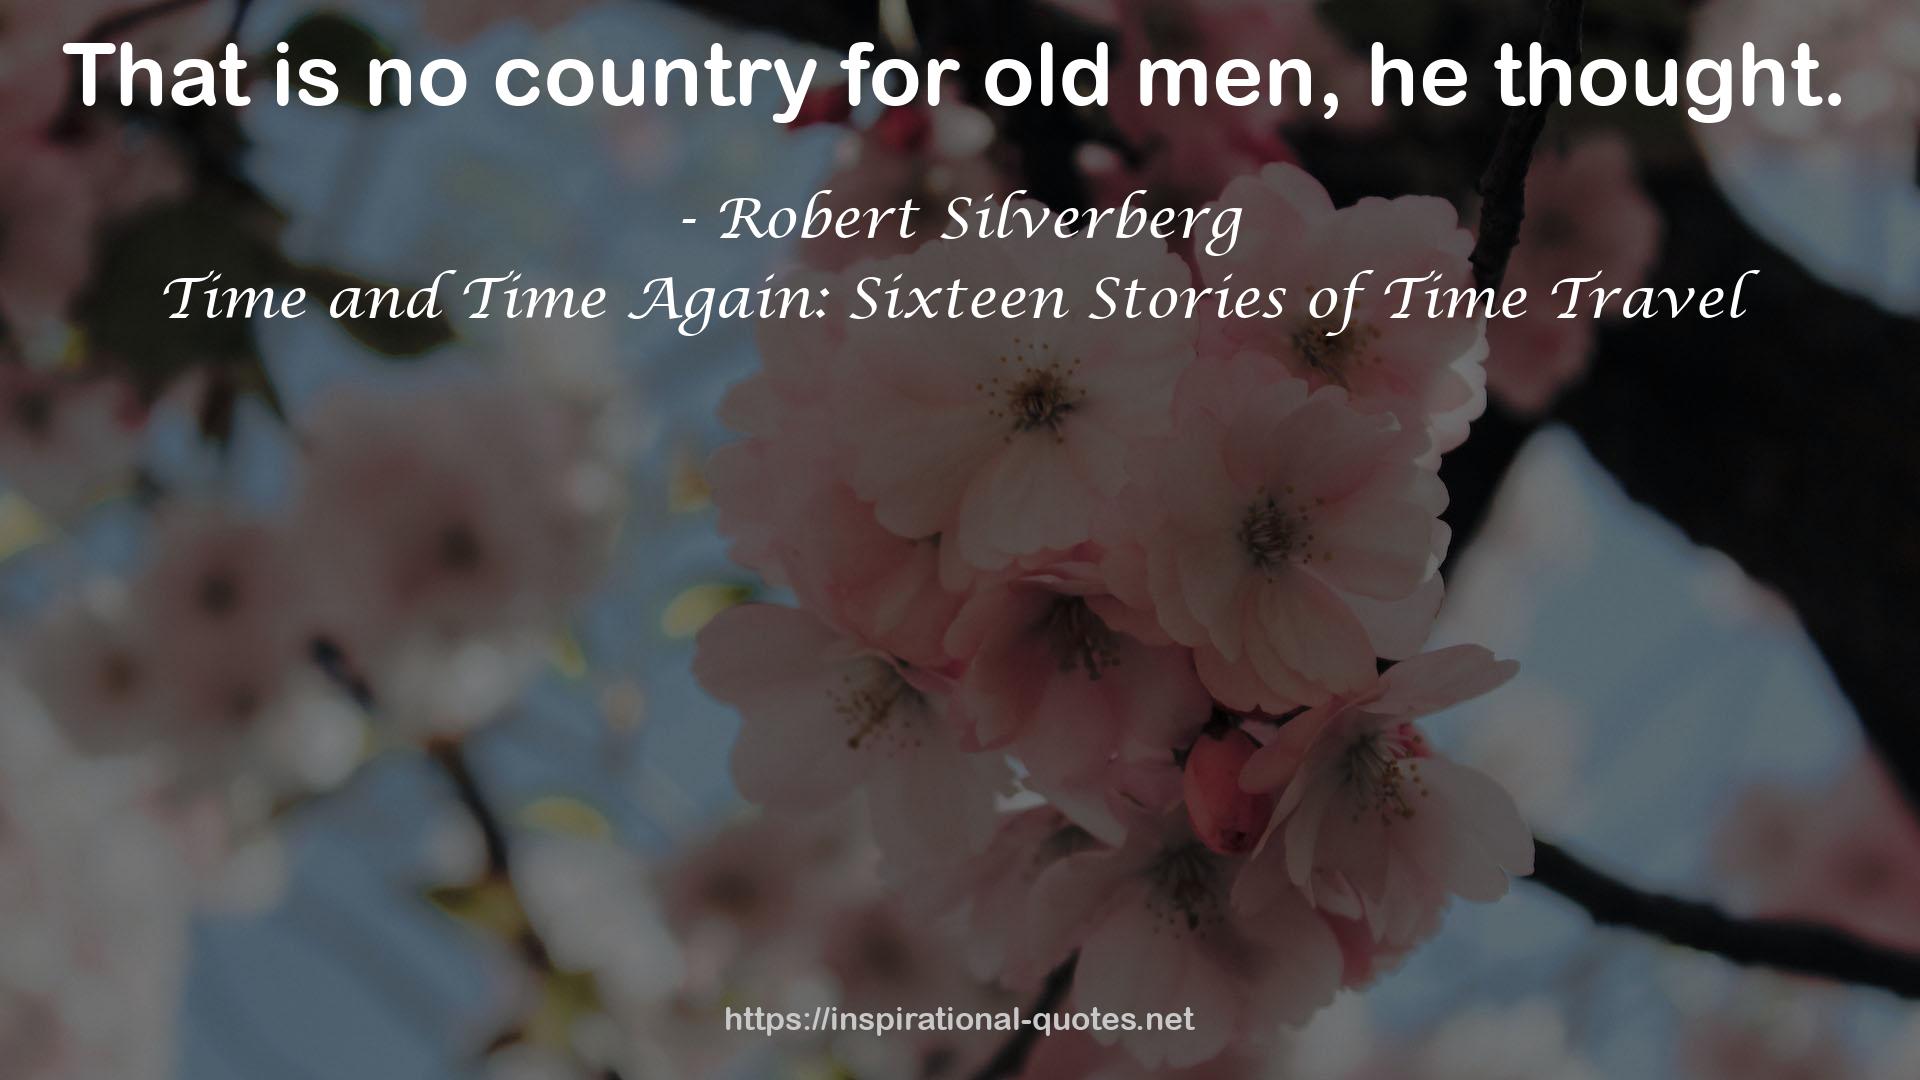 Time and Time Again: Sixteen Stories of Time Travel QUOTES